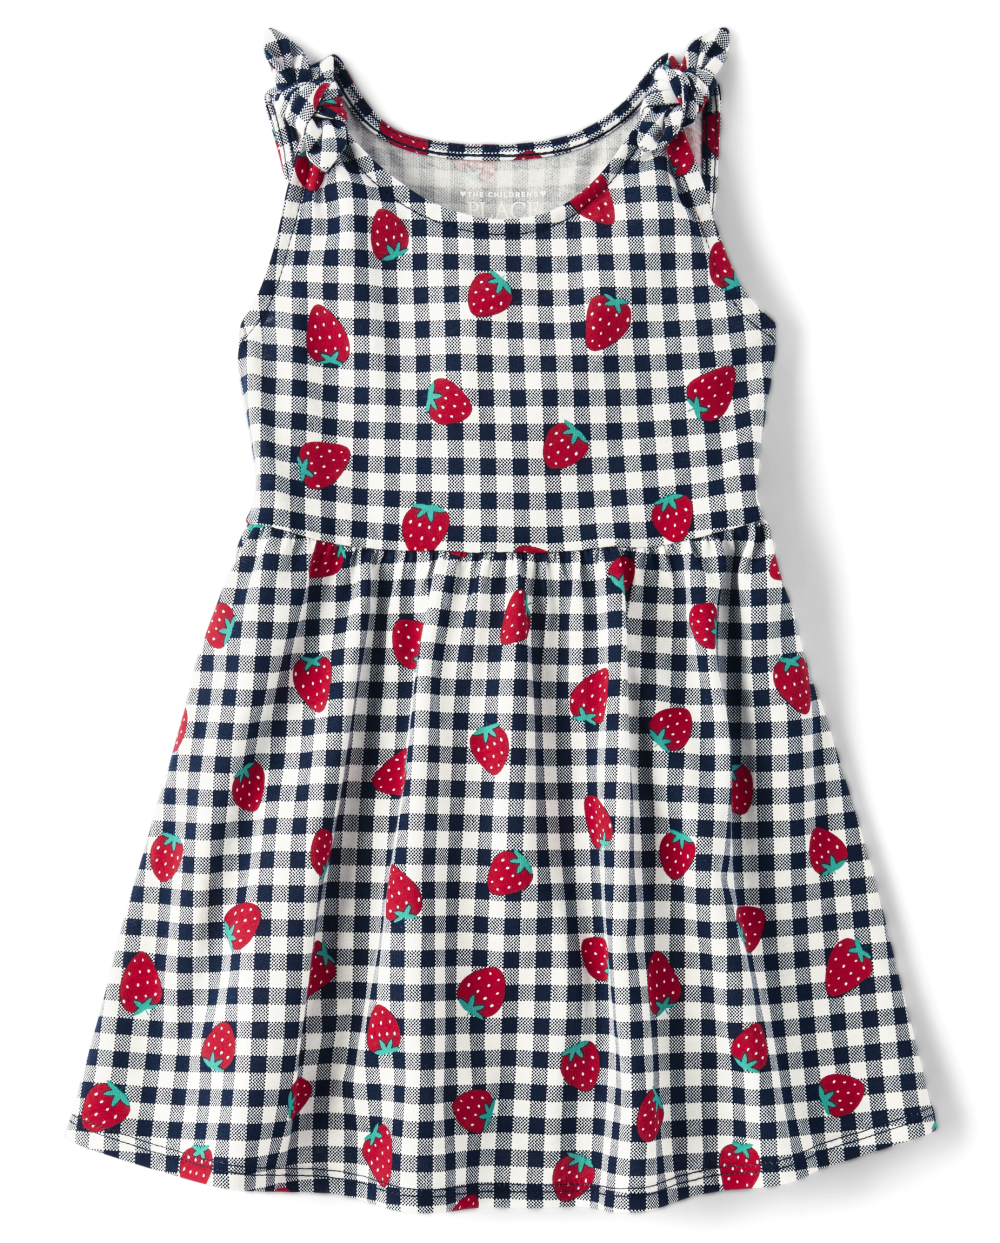 Toddler Baby Checkered Gingham Print Scoop Neck Above the Knee Sleeveless Dress